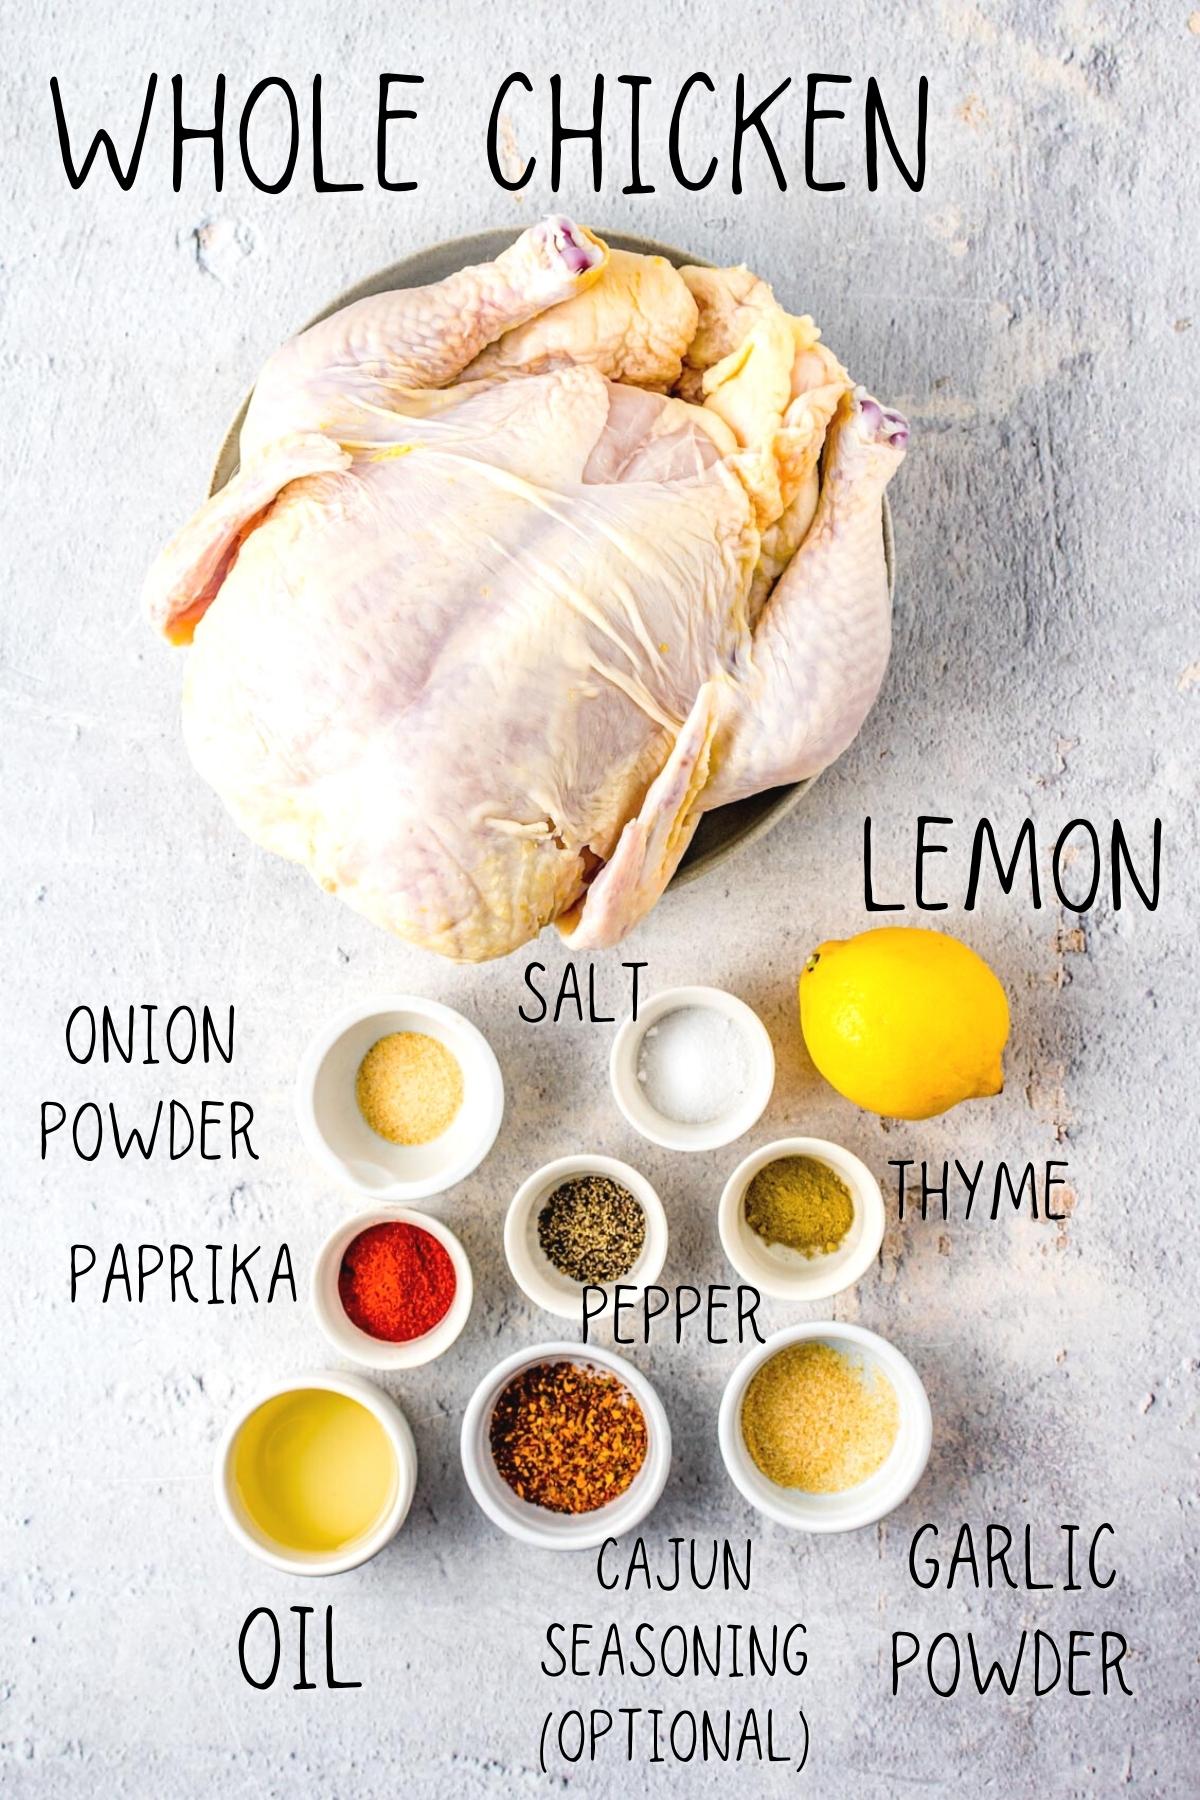 whole air fryer chicken recipe ingredients including a chicken, paprika, garlic powder, onion powder, thyme and oil